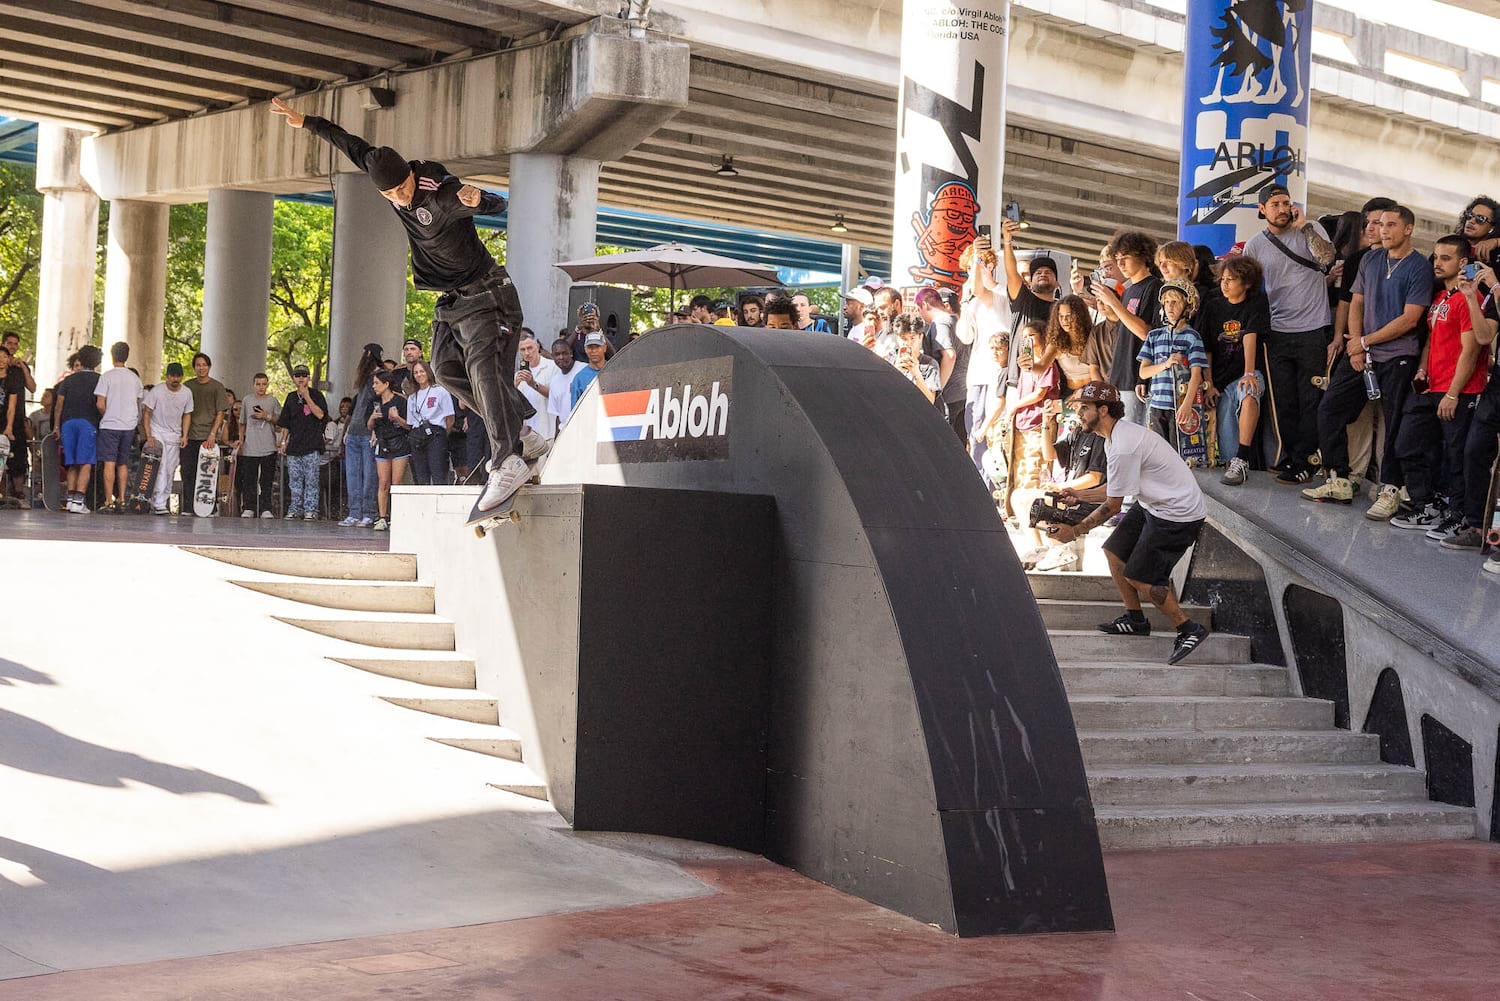 Get a Ramp-Side Look at the First Annual Abloh Skateboarding